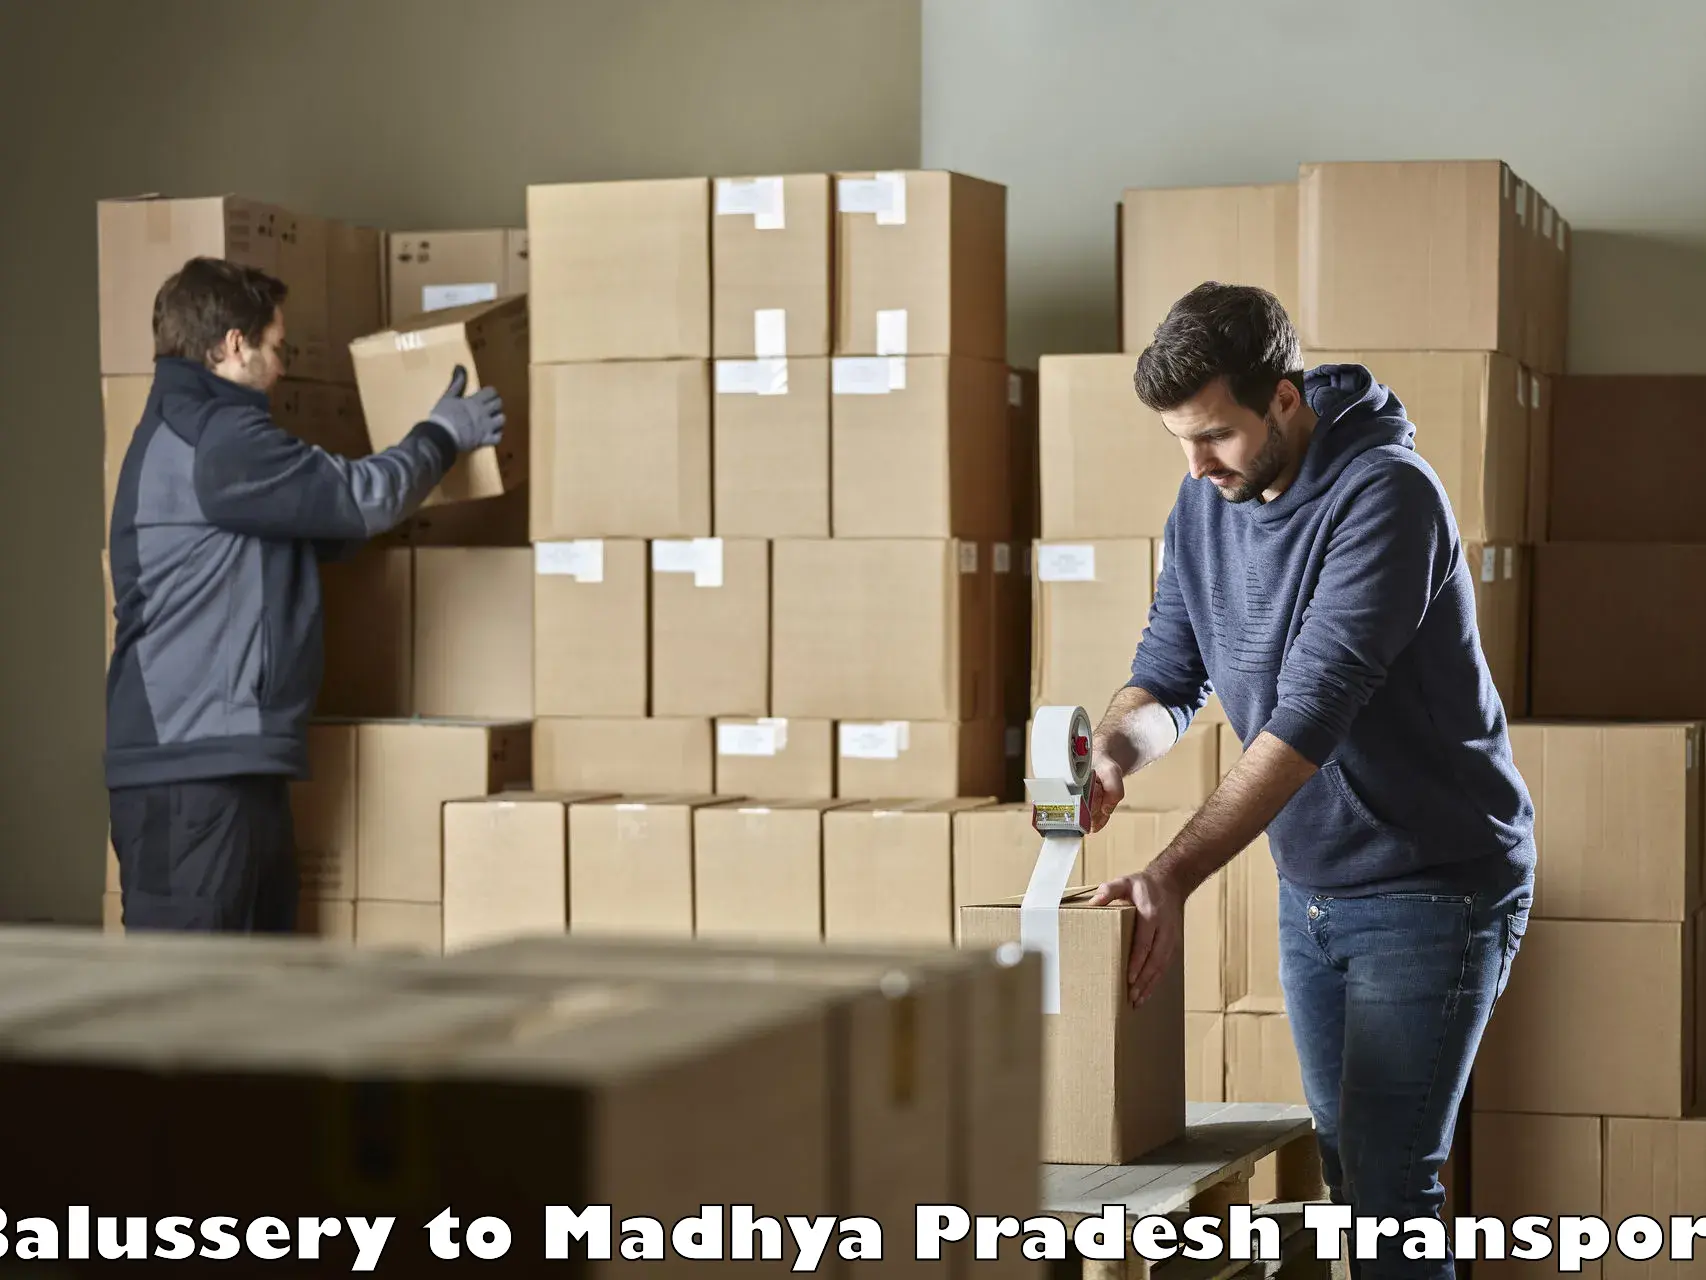 Pick up transport service Balussery to Chapda